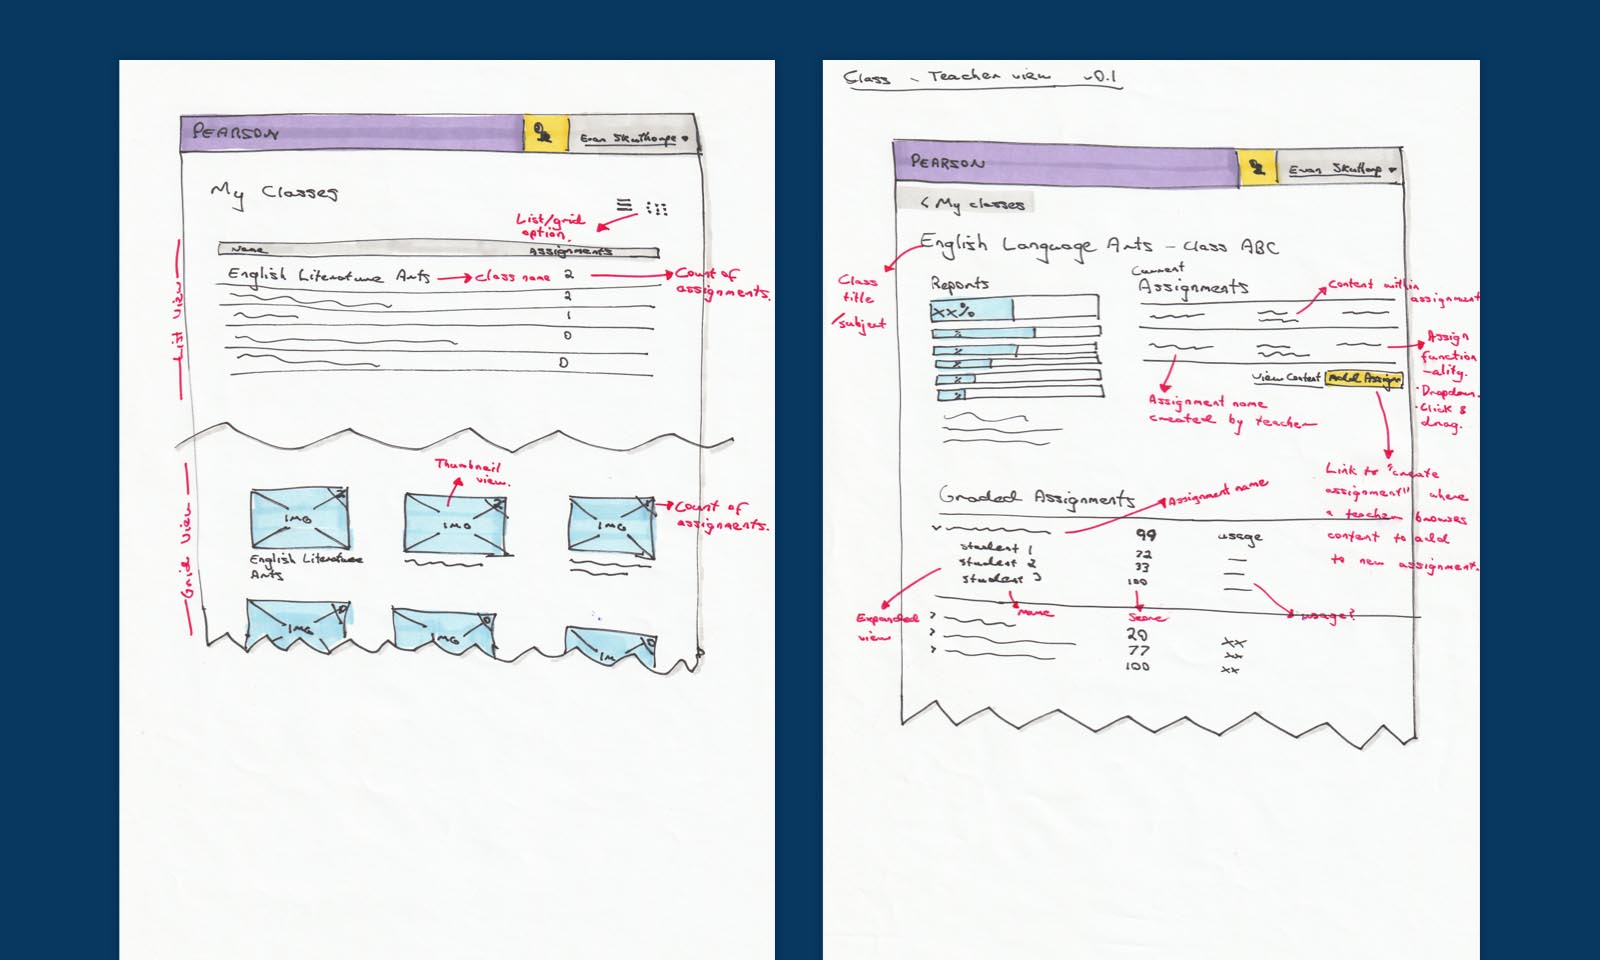 Annotated wireframe sketches produced during the design process for Pulse